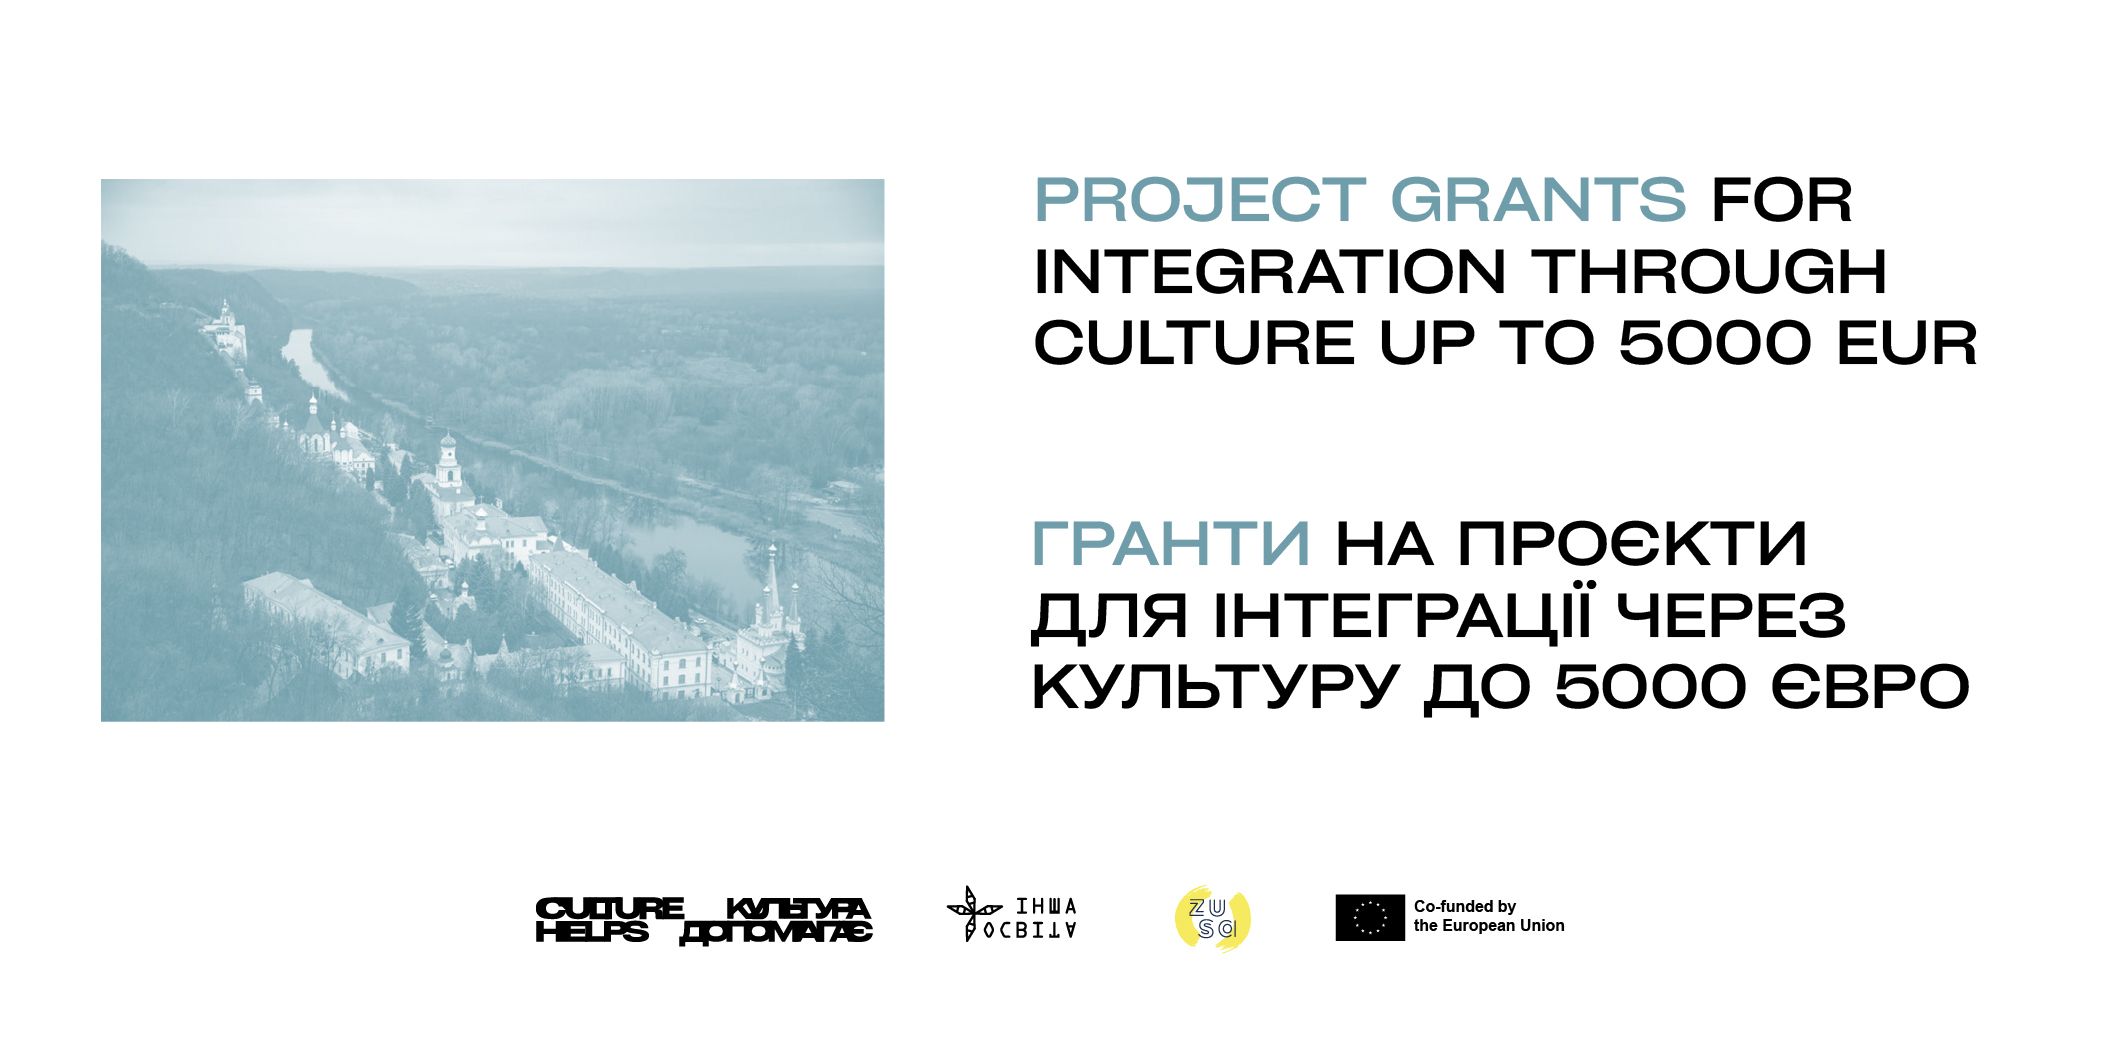 “Culture Helps / Культура допомагає”: Project grants for integration through culture up to 5000 EUR